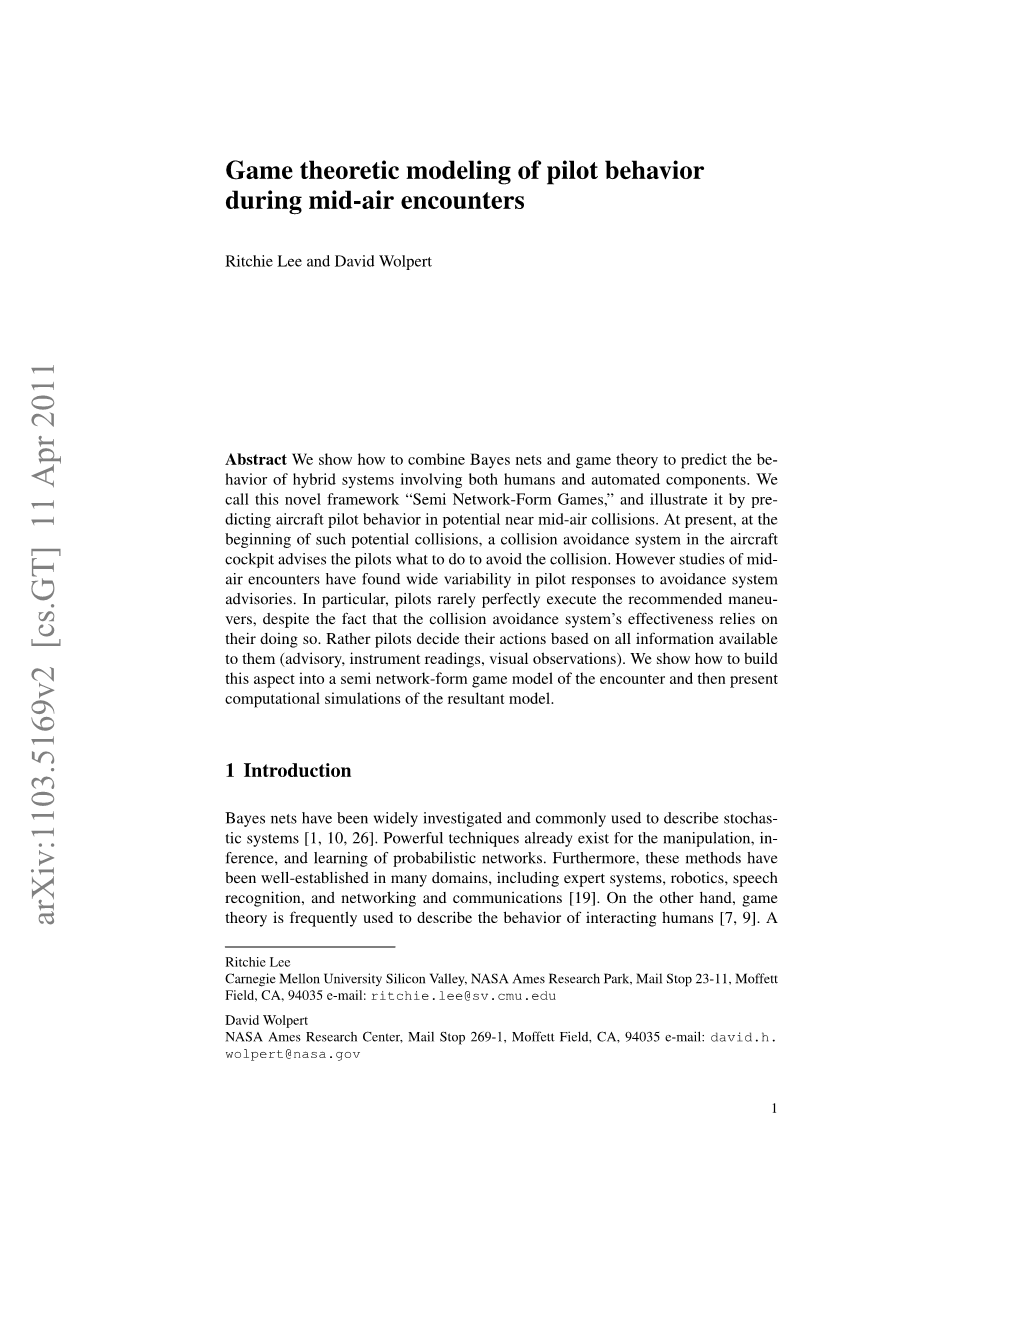 Game Theoretic Modeling of Pilot Behavior During Mid-Air Encounters